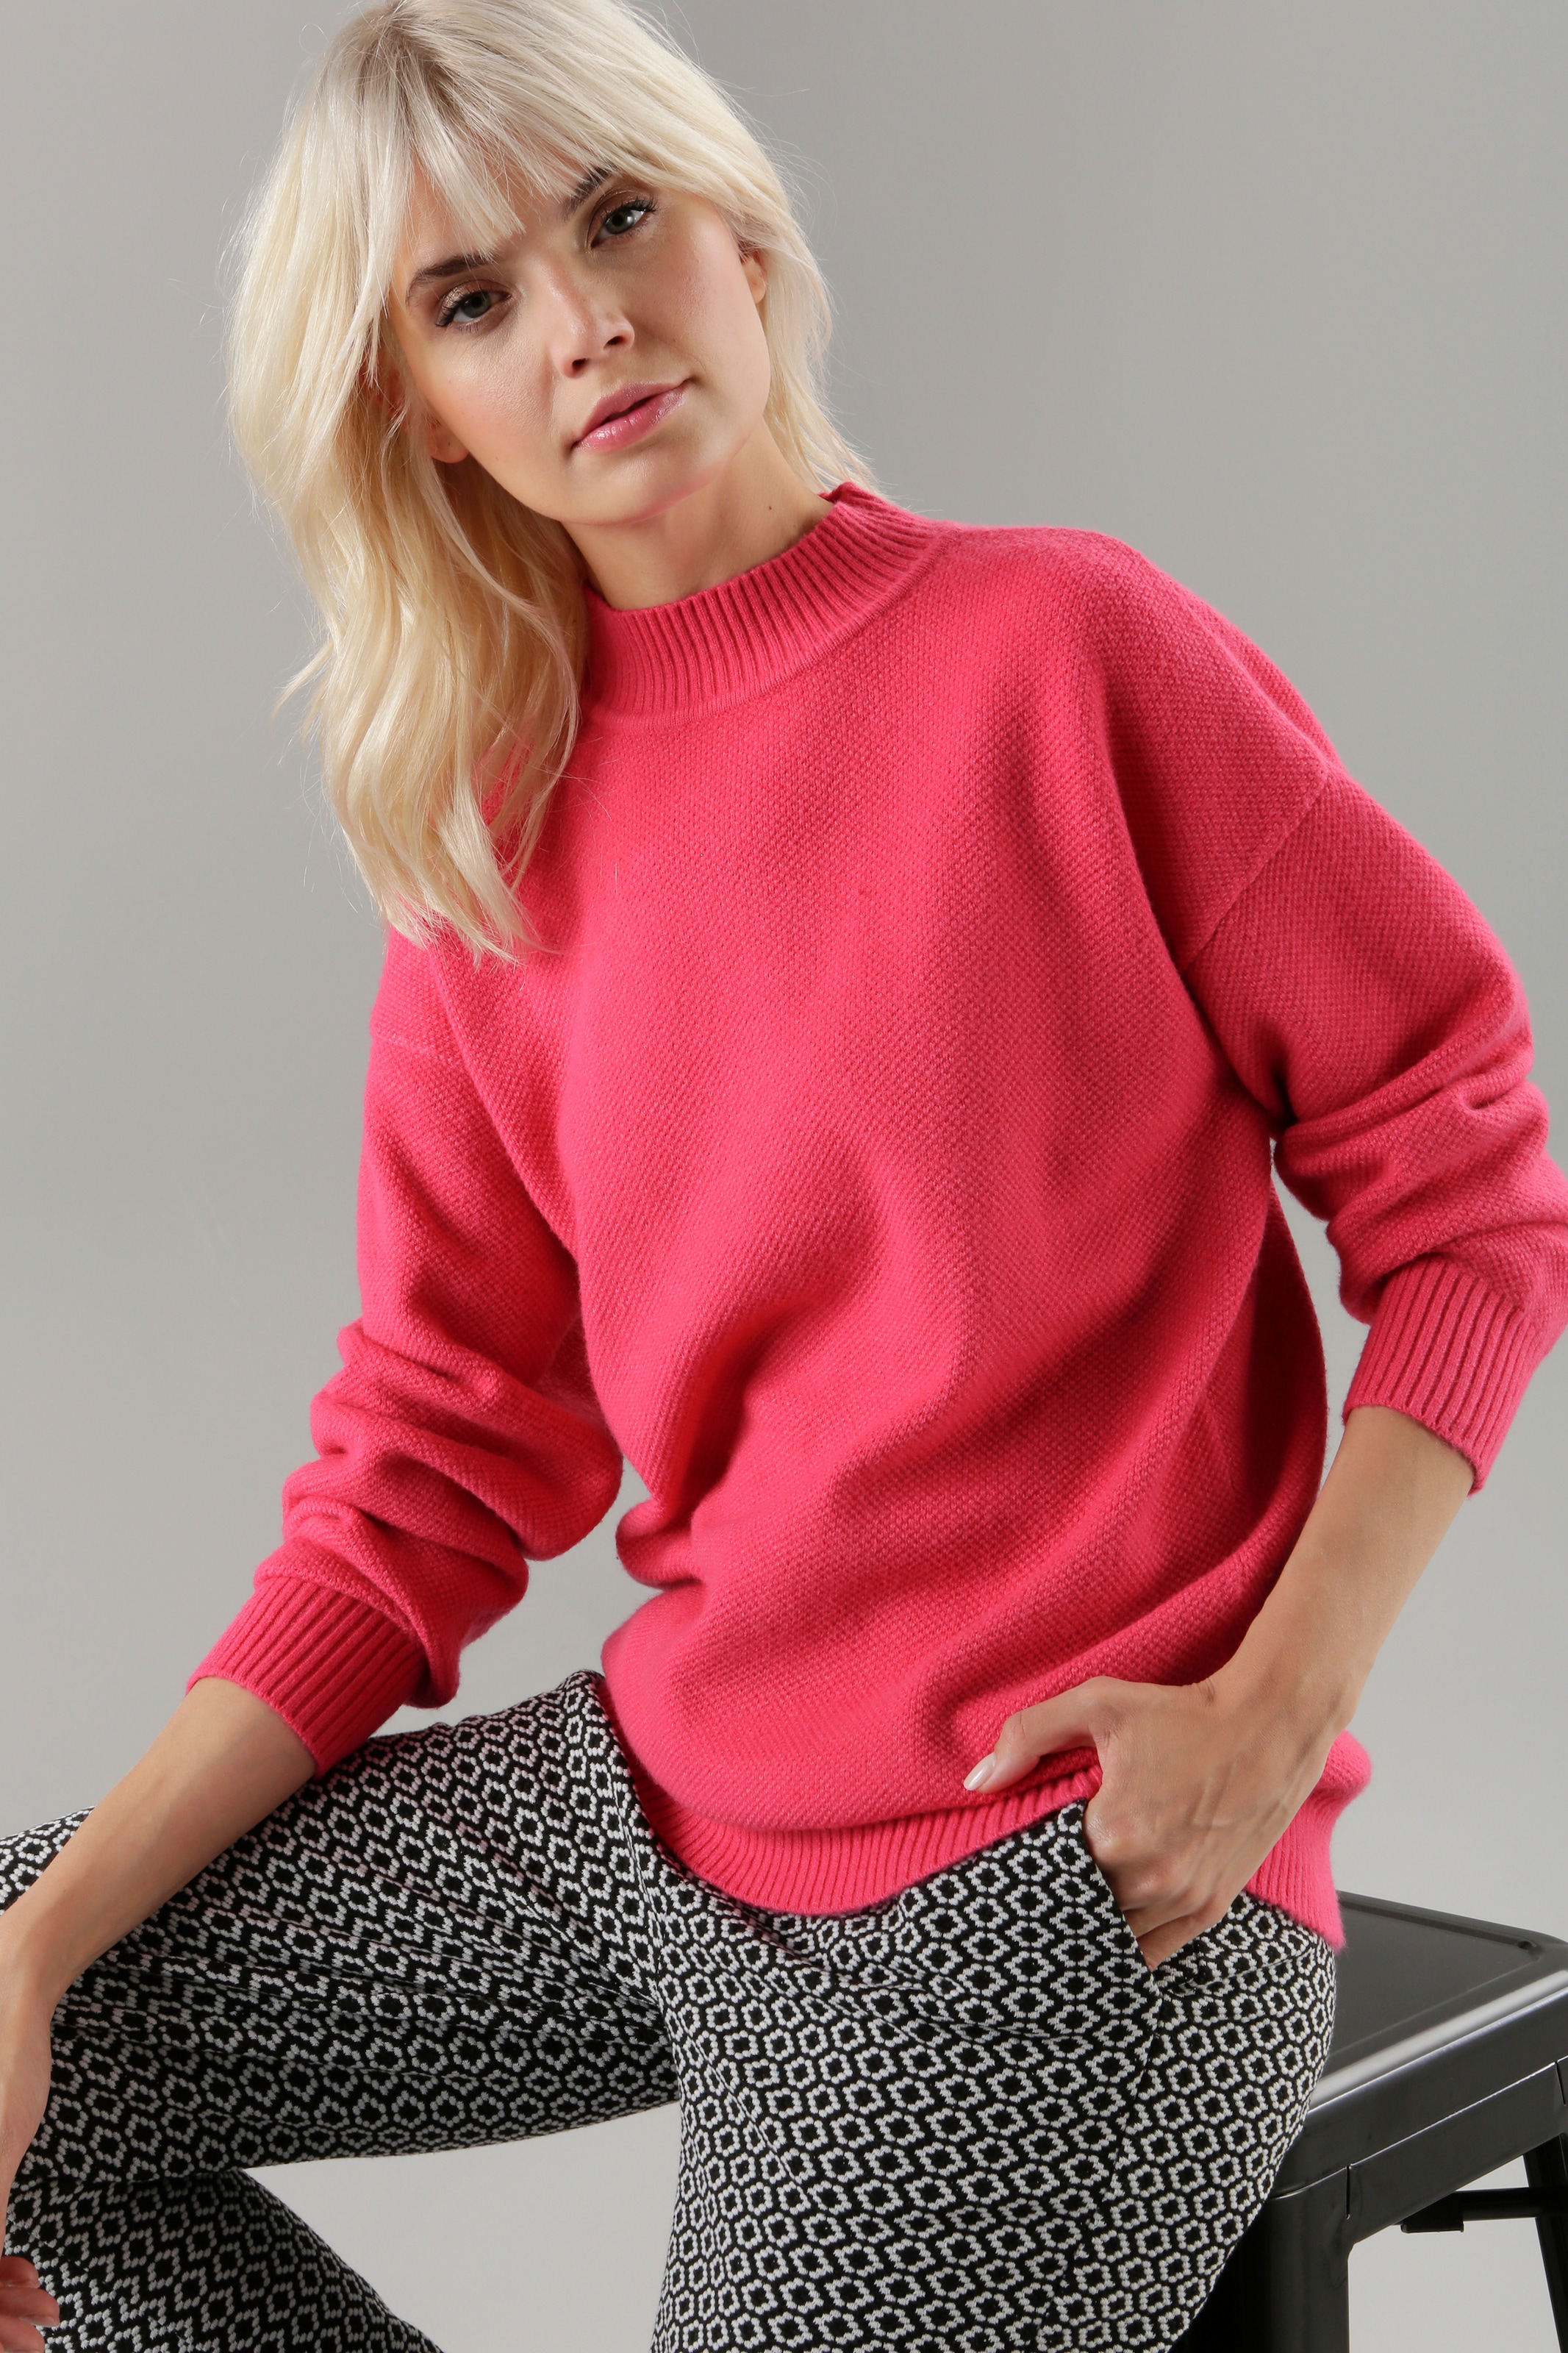 Aniston SELECTED Strickpullover, mit feinem Perlfangmuster